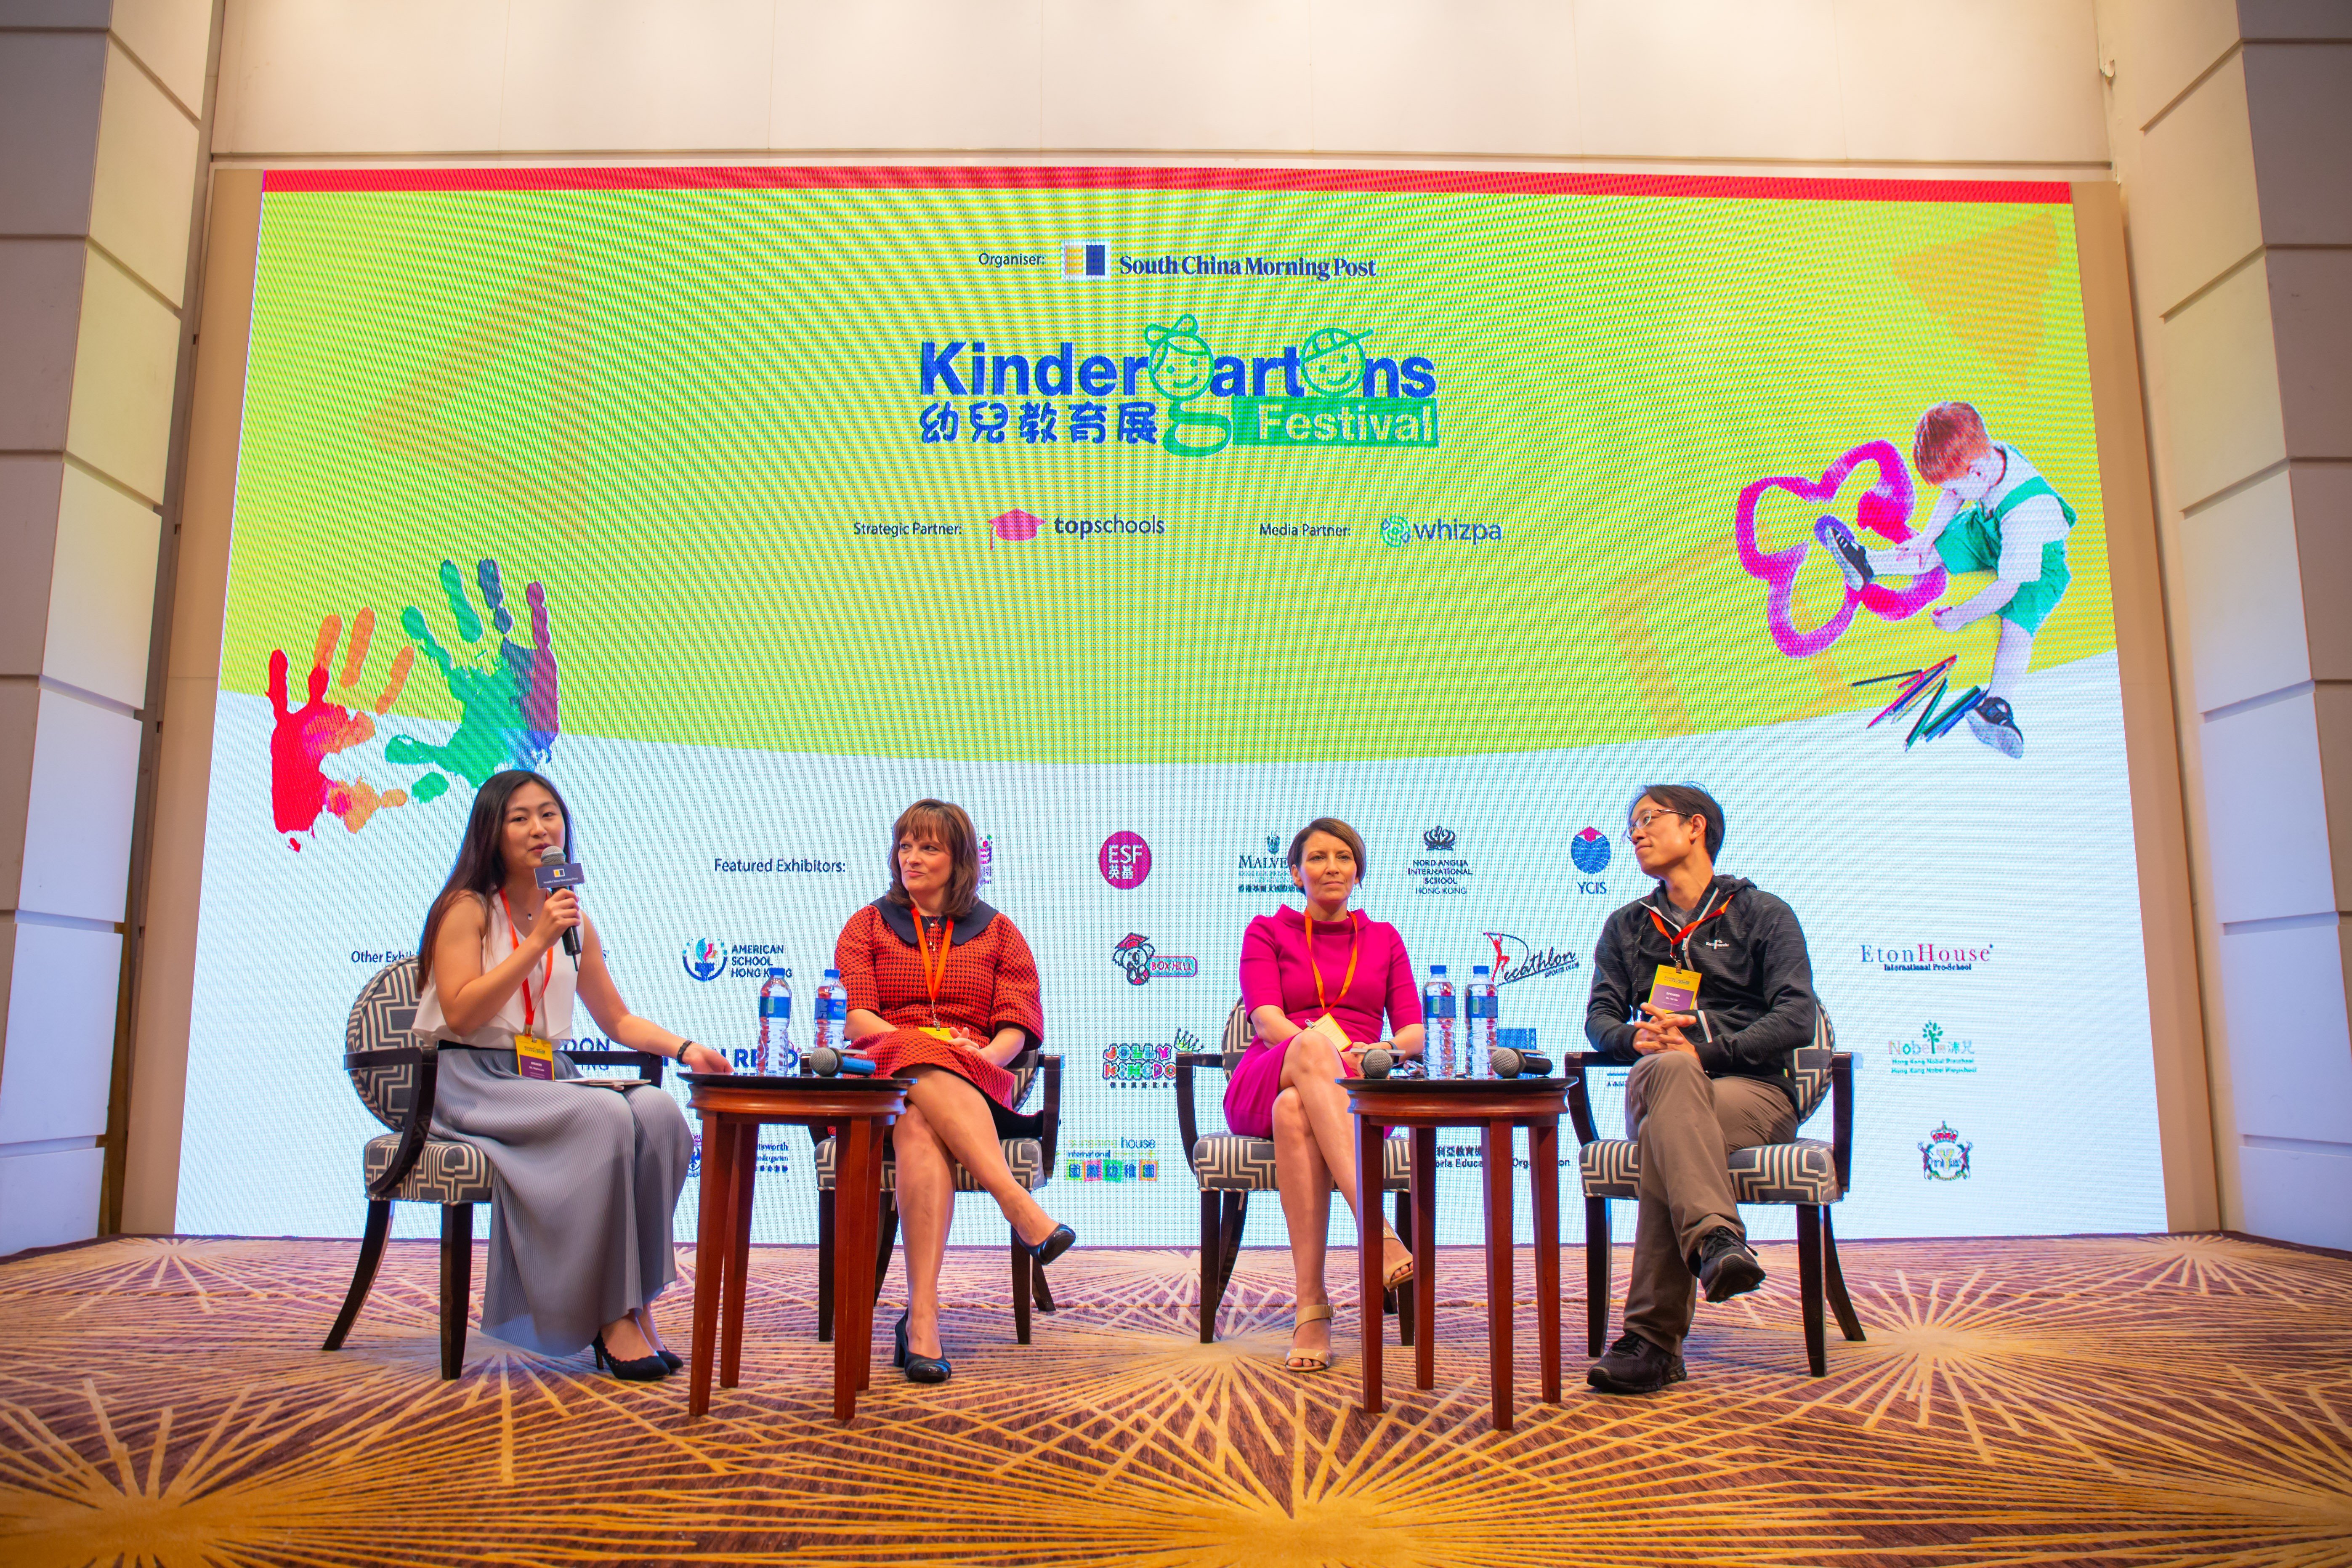 A panel discussion at SCMP Kindergartens Festival involving, from left: Sophia Lam, assistant education editor, SCMP; Joanne Mallary, assistant principal, American School Hong Kong; Dr Helen Kelly, lower school principal, Canadian International School of Hong Kong; and Yat Siu, founder and CEO, Outblaze.